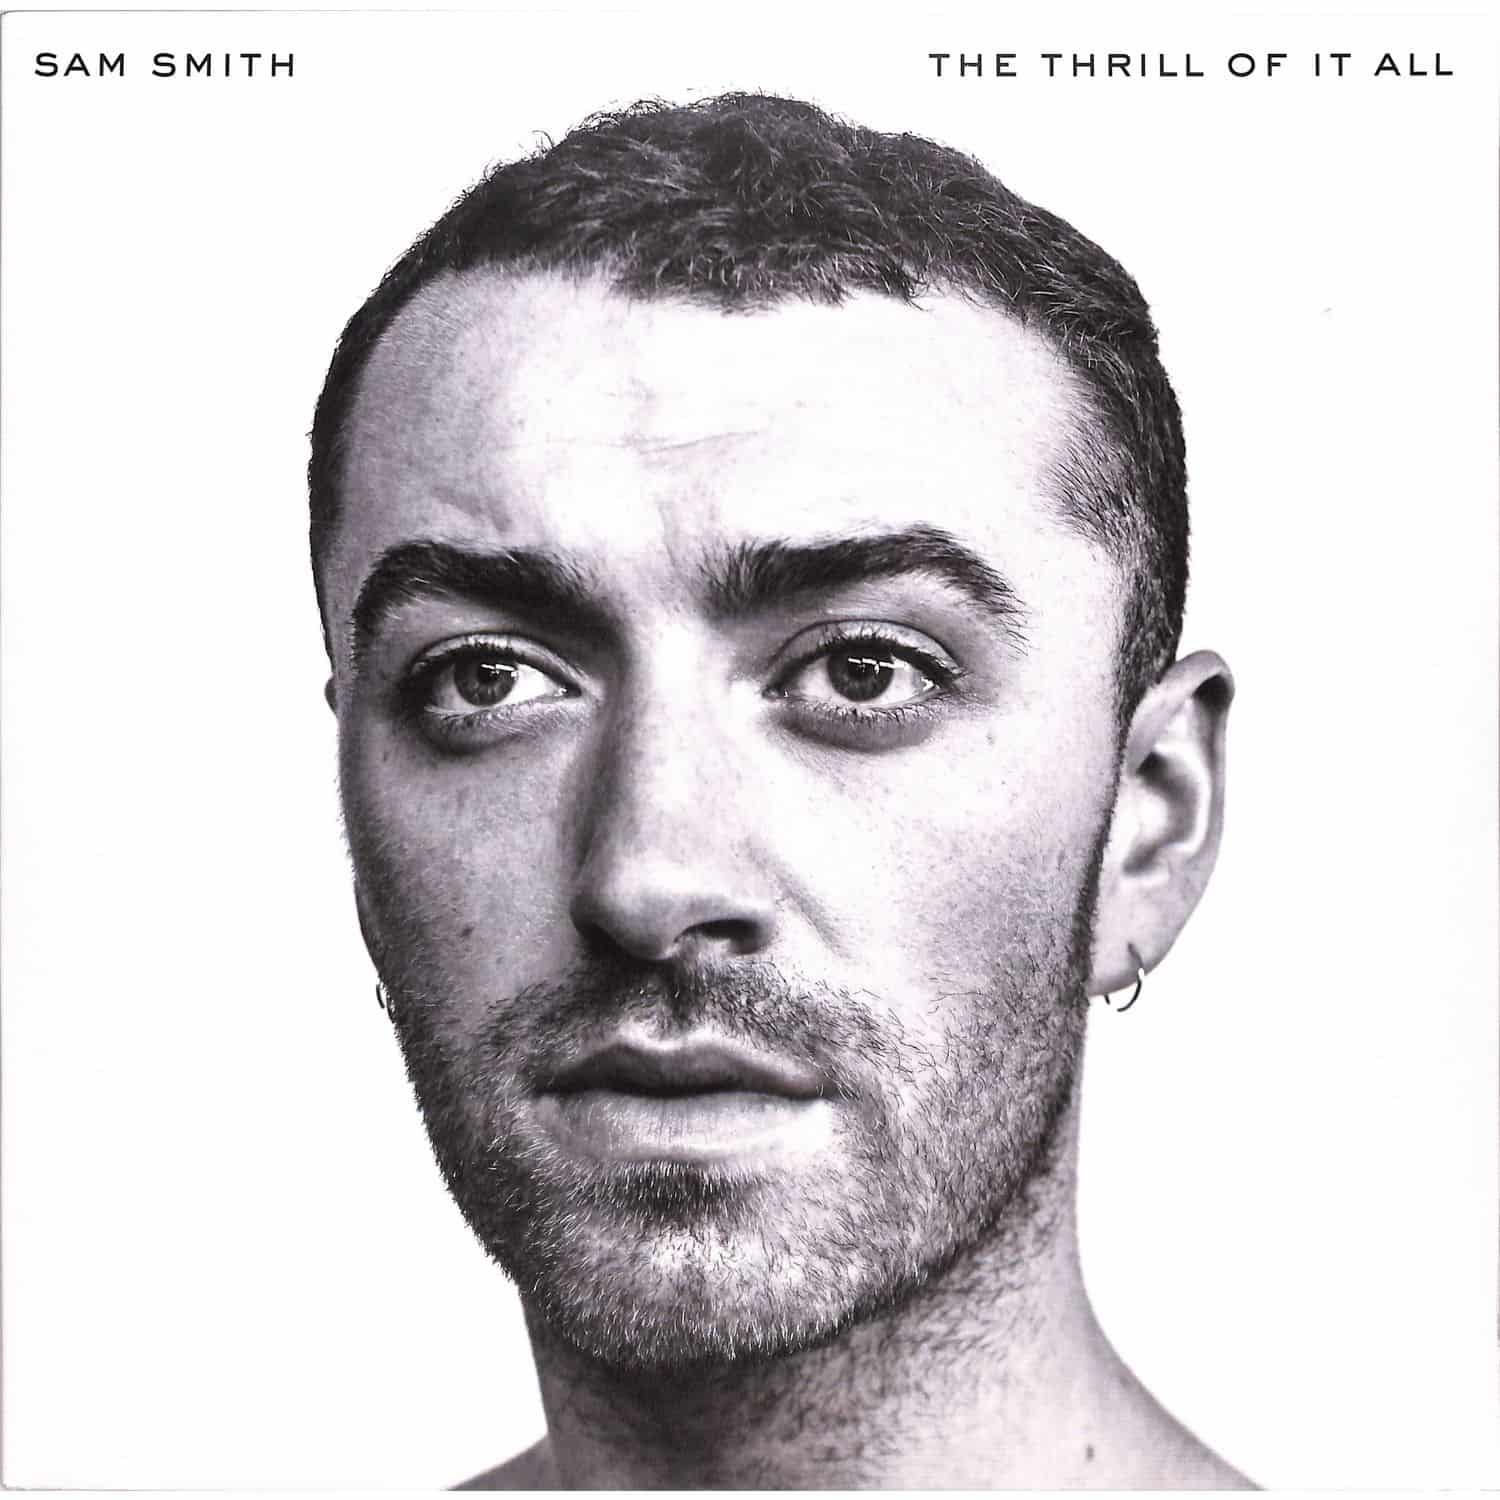 Sam Smith - THE THRILL OF IT ALL 